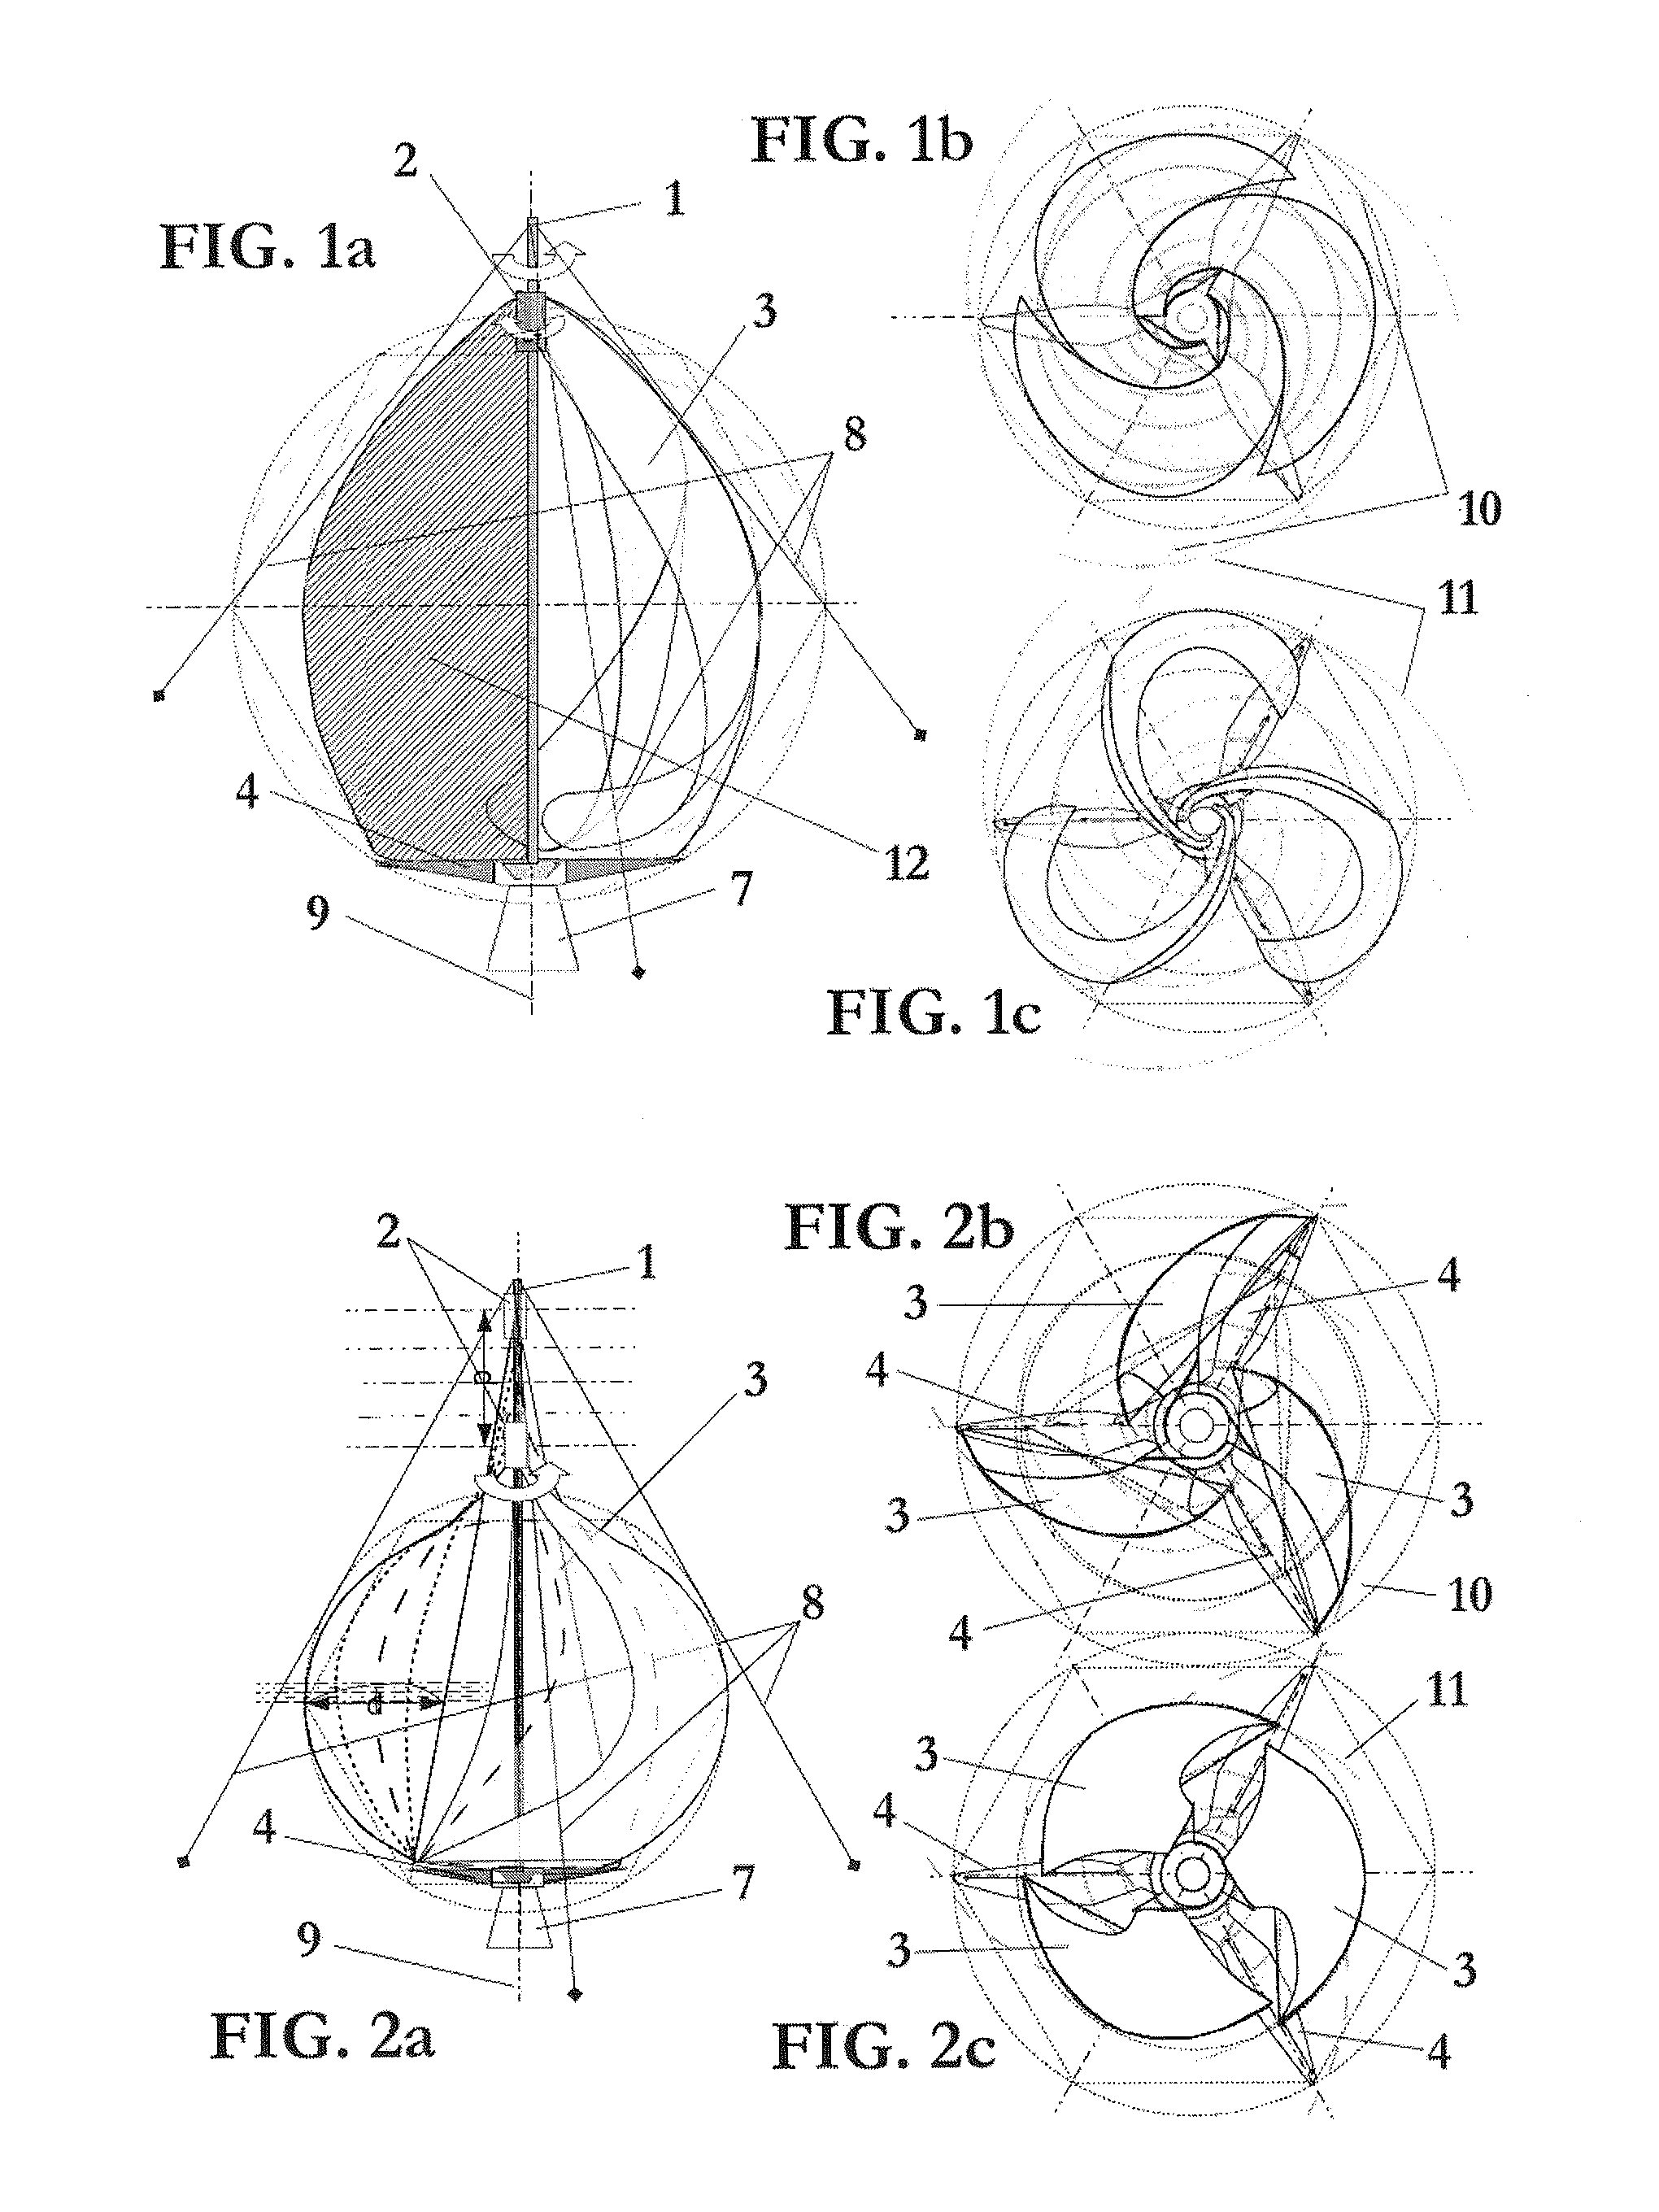 Driving force generating device